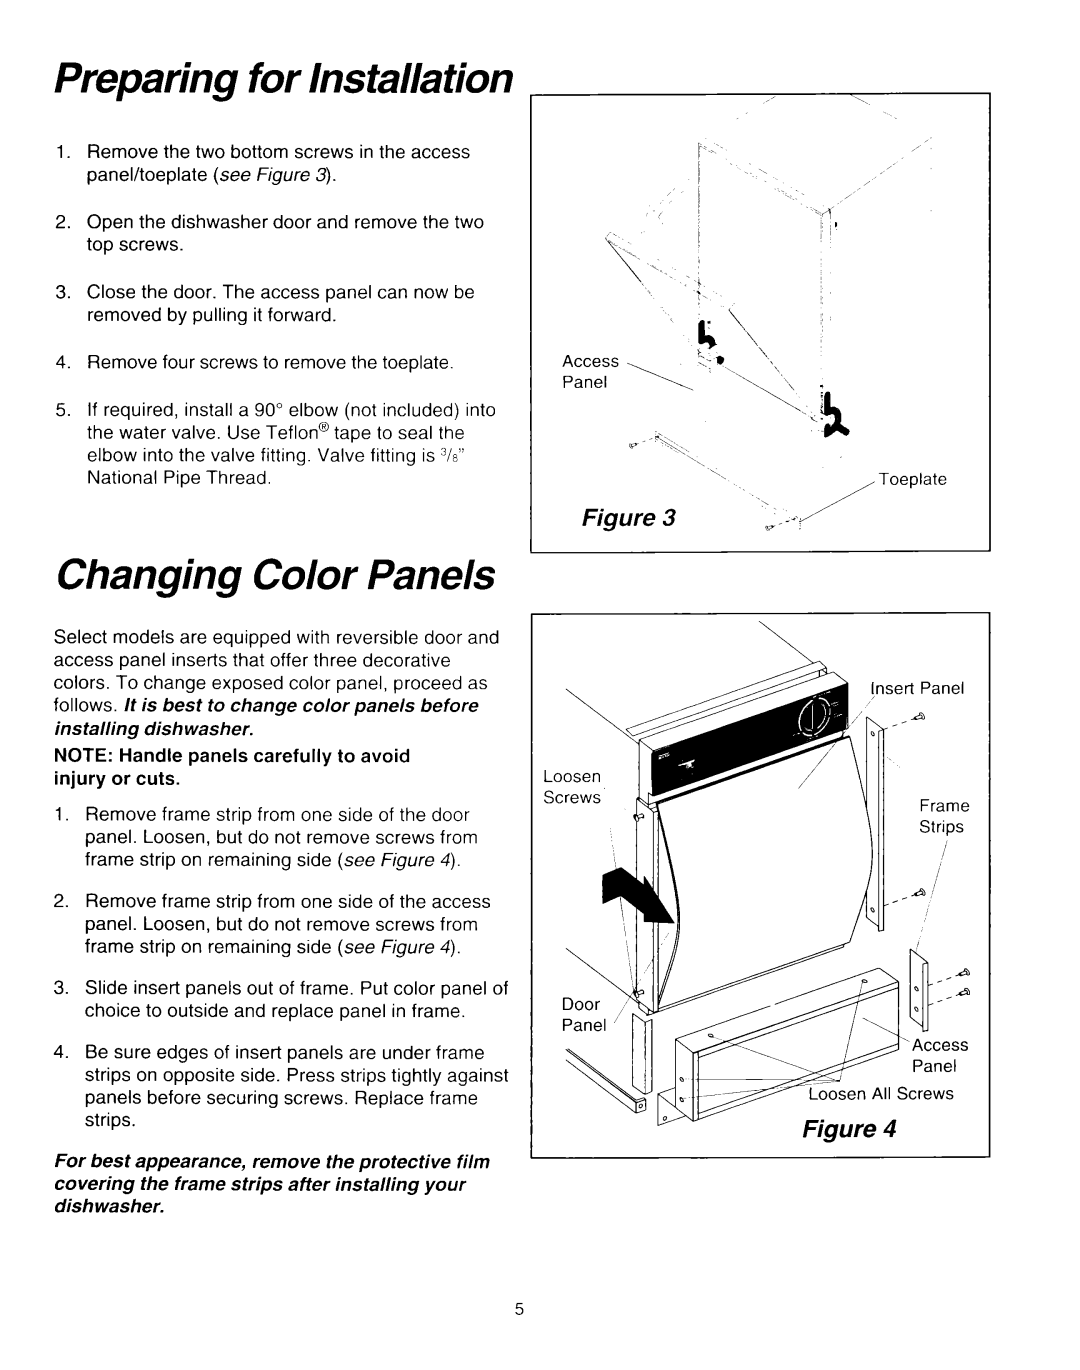 Whirlpool RUD0800EB installation instructions Preparing for Installation, Changing Color Panels 